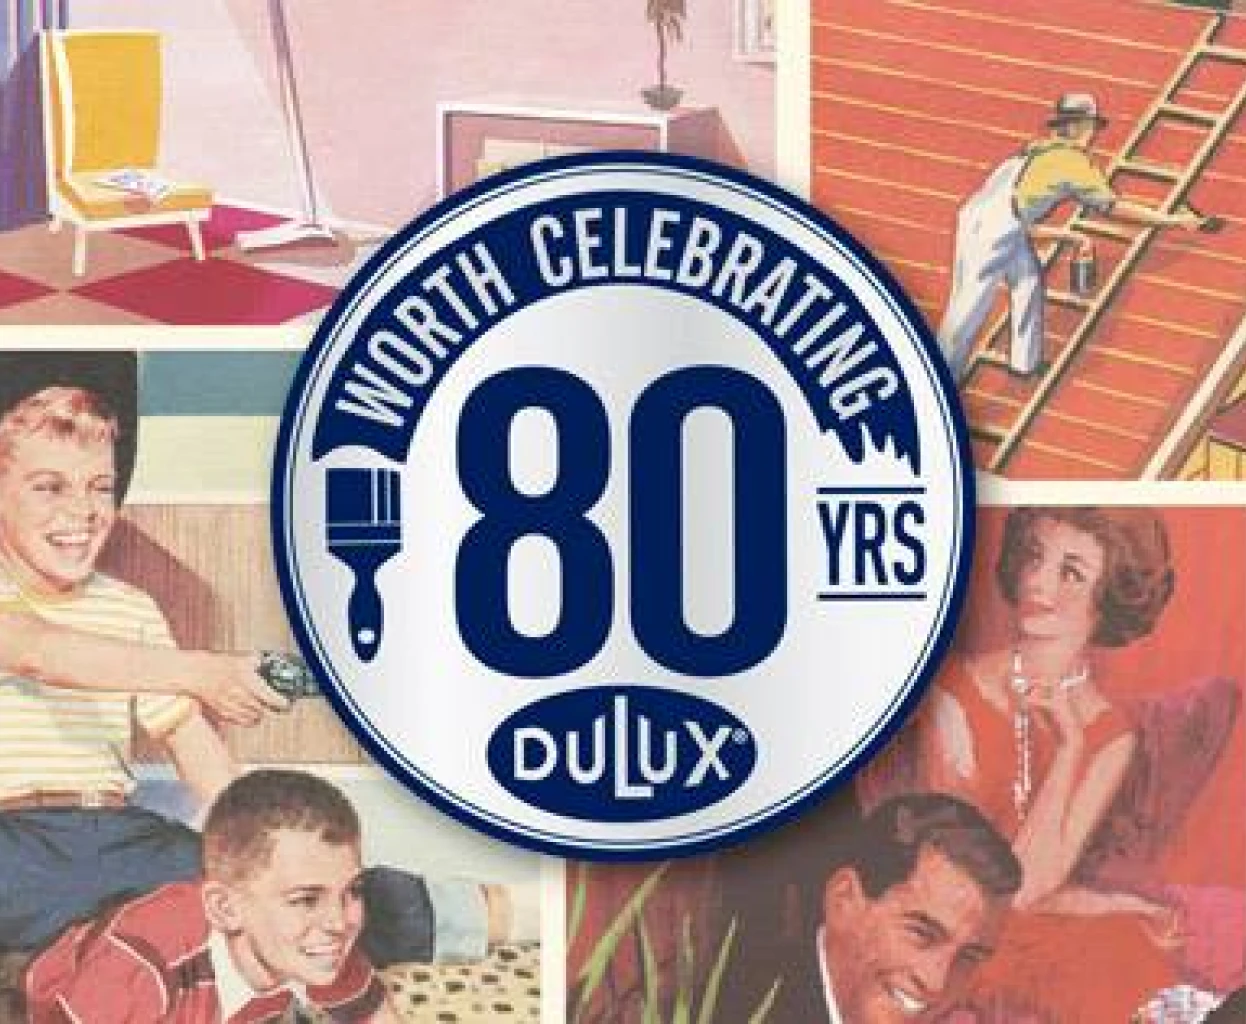 Dulux celebrating 80 year anniversary graphic over old Dulux marketing material